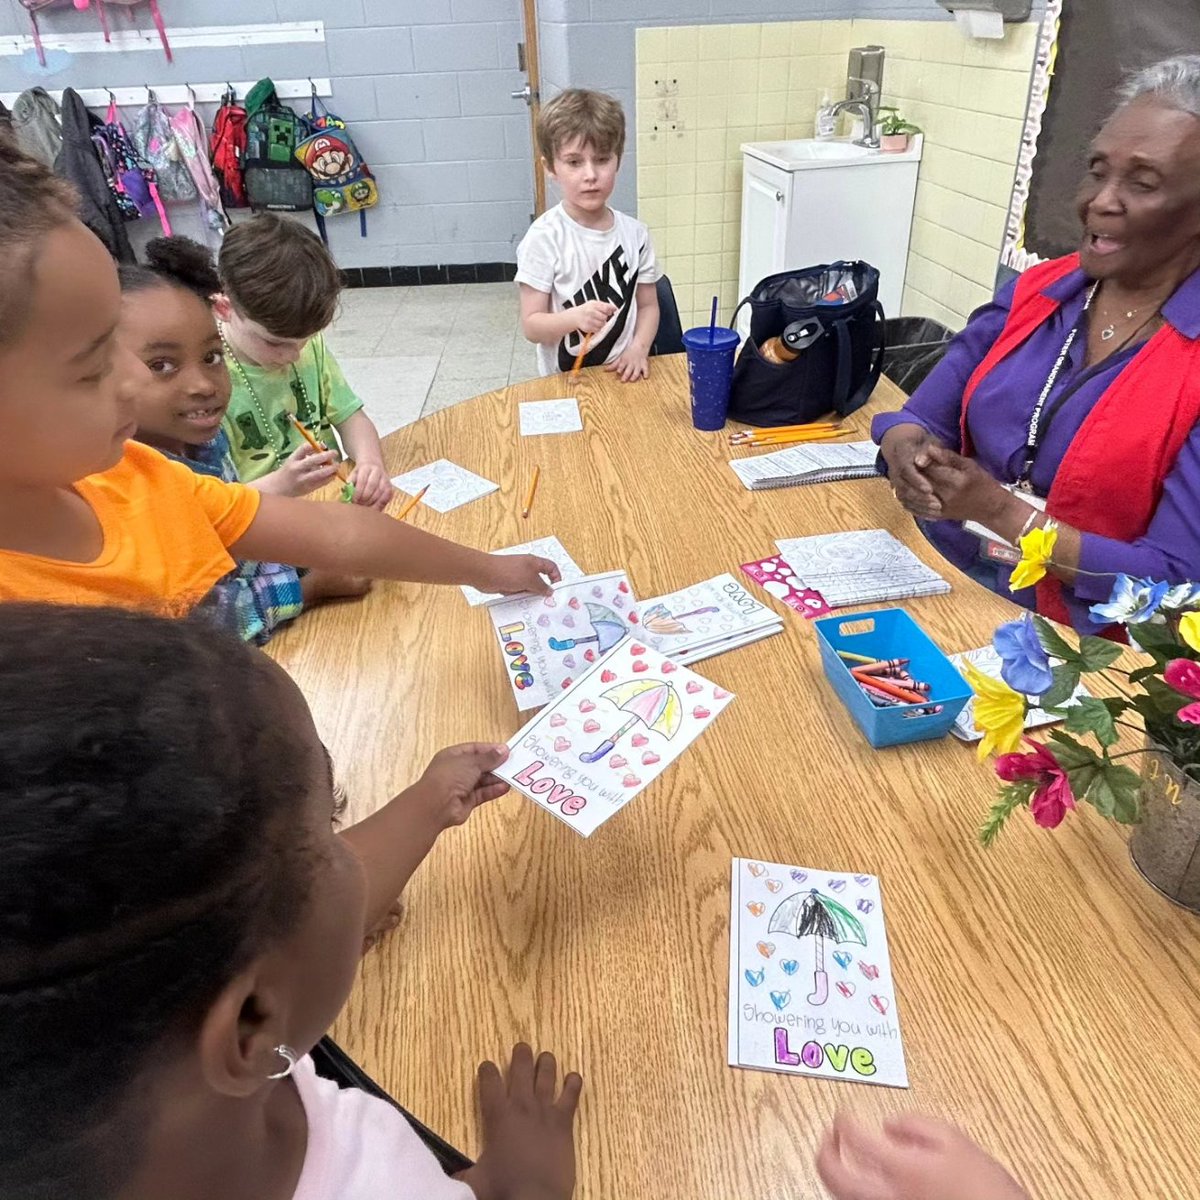 Our first grade students surprised one of our amazing volunteers, Grandma Hart, with cards they made to show how much they appreciate her! #CJSmith #volunteers #kindness #WeareHCS